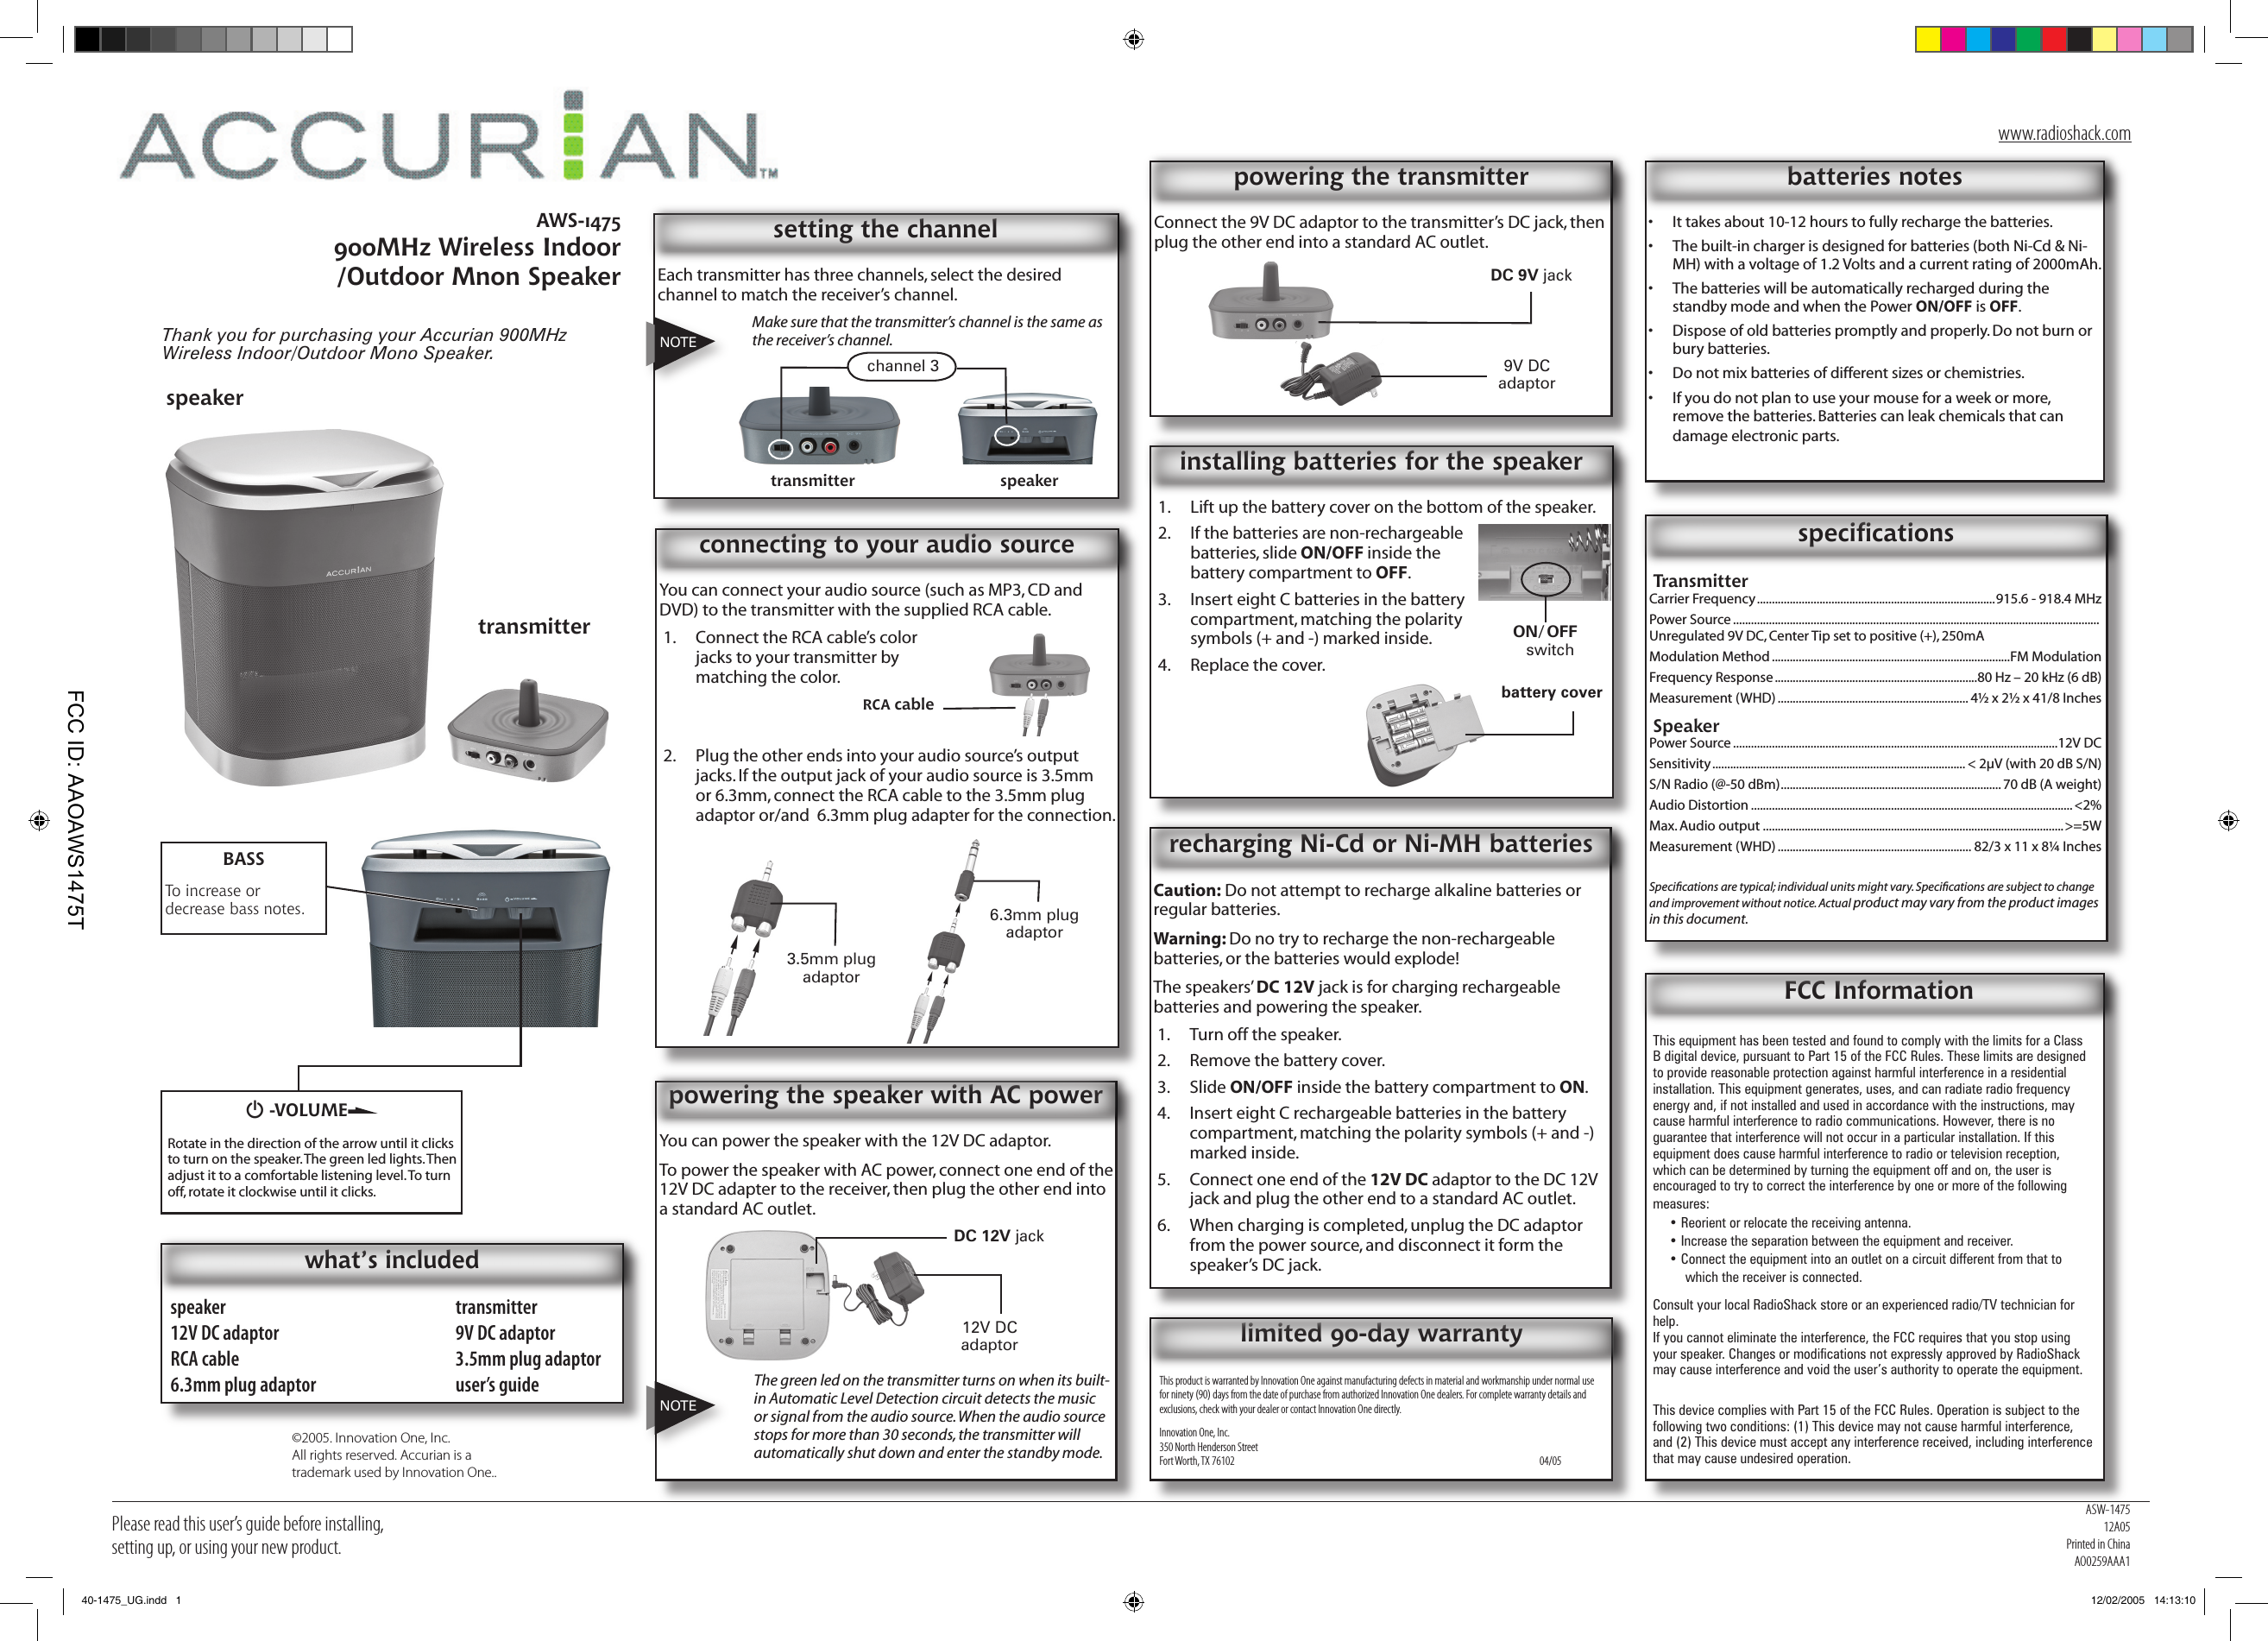 Please read this user’s guide before installing, setting up, or using your new product.AWS-1475900MHz Wireless Indoor /Outdoor Mnon SpeakerThank you for purchasing your Accurian 900MHz Wireless Indoor/Outdoor Mono Speaker. speaker  transmitter12V DC adaptor  9V DC adaptorRCA cable  3.5mm plug adaptor6.3mm plug adaptor  user’s guidewhat’s includedConnect the 9V DC adaptor to the transmitter’s DC jack, then plug the other end into a standard AC outlet.powering the transmitterEach transmitter has three channels, select the desired channel to match the receiver’s channel. Make sure that the transmitter’s channel is the same as the receiver’s channel.setting the channel FCC InformationThis equipment has been tested and found to comply with the limits for a Class B digital device, pursuant to Part 15 of the FCC Rules. These limits are designed to provide reasonable protection against harmful interference in a residential installation. This equipment generates, uses, and can radiate radio frequency energy and, if not installed and used in accordance with the instructions, may cause harmful interference to radio communications. However, there is no guarantee that interference will not occur in a particular installation. If this equipment does cause harmful interference to radio or television reception, which can be determined by turning the equipment off and on, the user is encouraged to try to correct the interference by one or more of the following measures:• Reorient or relocate the receiving antenna.• Increase the separation between the equipment and receiver. • Connect the equipment into an outlet on a circuit different from that to which the receiver is connected. Consult your local RadioShack store or an experienced radio/TV technician for help.If you cannot eliminate the interference, the FCC requires that you stop using your speaker. Changes or modiﬁcations not expressly approved by RadioShack may cause interference and void the user’s authority to operate the equipment.This device complies with Part 15 of the FCC Rules. Operation is subject to the following two conditions: (1) This device may not cause harmful interference, and (2) This device must accept any interference received, including interference that may cause undesired operation.speakertransmitterG -VOLUMERotate in the direction of the arrow until it clicks to turn on the speaker. The green led lights. Then adjust it to a comfortable listening level. To turn off, rotate it clockwise until it clicks.BASSTo increase or decrease bass notes.TransmitterCarrier Frequency ................................................................................915.6 - 918.4 MHzPower Source ...........................................................................................................................  Unregulated 9V DC, Center Tip set to positive (+), 250mAModulation Method ................................................................................FM ModulationFrequency Response ....................................................................80 Hz – 20 kHz (6 dB)Measurement (WHD) ................................................................ 4½ x 2½ x 41/8 InchesSpeakerPower Source .............................................................................................................12V DCSensitivity ..................................................................................... &lt; 2µV (with 20 dB S/N)S/N Radio (@-50 dBm) .......................................................................... 70 dB (A weight)Audio Distortion ............................................................................................................ &lt;2%Max. Audio output .....................................................................................................&gt;=5WMeasurement (WHD) ................................................................. 82/3 x 11 x 8¼ InchesSpeciﬁcations are typical; individual units might vary. Speciﬁcations are subject to change and improvement without notice. Actual product may vary from the product images in this document.speciﬁcationsNOTEchannel 3 9V DC adaptorDC 9V jackCaution: Do not attempt to recharge alkaline batteries or regular batteries. Warning: Do no try to recharge the non-rechargeable batteries, or the batteries would explode!The speakers’ DC 12V jack is for charging rechargeable batteries and powering the speaker.1.  Turn off the speaker.2.  Remove the battery cover.3.  Slide ON/OFF inside the battery compartment to ON. 4.  Insert eight C rechargeable batteries in the battery compartment, matching the polarity symbols (+ and -) marked inside.5.  Connect one end of the 12V DC adaptor to the DC 12V jack and plug the other end to a standard AC outlet.6.  When charging is completed, unplug the DC adaptor from the power source, and disconnect it form the speaker’s DC jack.recharging Ni-Cd or Ni-MH batteriestransmitter speakerYou can connect your audio source (such as MP3, CD and DVD) to the transmitter with the supplied RCA cable.1.  Connect the RCA cable’s color jacks to your transmitter by matching the color.2.  Plug the other ends into your audio source’s output jacks. If the output jack of your audio source is 3.5mm or 6.3mm, connect the RCA cable to the 3.5mm plug adaptor or/and  6.3mm plug adapter for the connection.connecting to y0ur audio sourceYou can power the speaker with the 12V DC adaptor.To power the speaker with AC power, connect one end of the 12V DC adapter to the receiver, then plug the other end into a standard AC outlet.The green led on the transmitter turns on when its built-in Automatic Level Detection circuit detects the music or signal from the audio source. When the audio source stops for more than 30 seconds, the transmitter will automatically shut down and enter the standby mode.powering the speaker with AC power1.  Lift up the battery cover on the bottom of the speaker.2.  If the batteries are non-rechargeable batteries, slide ON/OFF inside the battery compartment to OFF. 3.  Insert eight C batteries in the battery compartment, matching the polarity symbols (+ and -) marked inside.4.  Replace the cover.installing batteries for the speaker•  It takes about 10-12 hours to fully recharge the batteries.•  The built-in charger is designed for batteries (both Ni-Cd &amp; Ni-MH) with a voltage of 1.2 Volts and a current rating of 2000mAh.•  The batteries will be automatically recharged during the standby mode and when the Power ON/OFF is OFF.•  Dispose of old batteries promptly and properly. Do not burn or bury batteries.•  Do not mix batteries of different sizes or chemistries.•  If you do not plan to use your mouse for a week or more, remove the batteries. Batteries can leak chemicals that can damage electronic parts.batteries notesRCA cable3.5mm plug adaptor6.3mm plug adaptor12V DC adaptorDC 12V jackON/OFF switchbattery coverThis product is warranted by Innovation One against manufacturing defects in material and workmanship under normal use for ninety (90) days from the date of purchase from authorized Innovation One dealers. For complete warranty details and exclusions, check with your dealer or contact Innovation One directly.Innovation One, Inc. 350 North Henderson Street Fort Worth, TX 76102          04/05limited 90-day warrantyNOTE©2005. Innovation One, Inc. All rights reserved. Accurian is a trademark used by Innovation One..ASW-147512A05Printed in ChinaAO0259AAA1www.radioshack.com40-1475_UG.indd   1 12/02/2005   14:13:10FCC ID: AAOAWS1475T